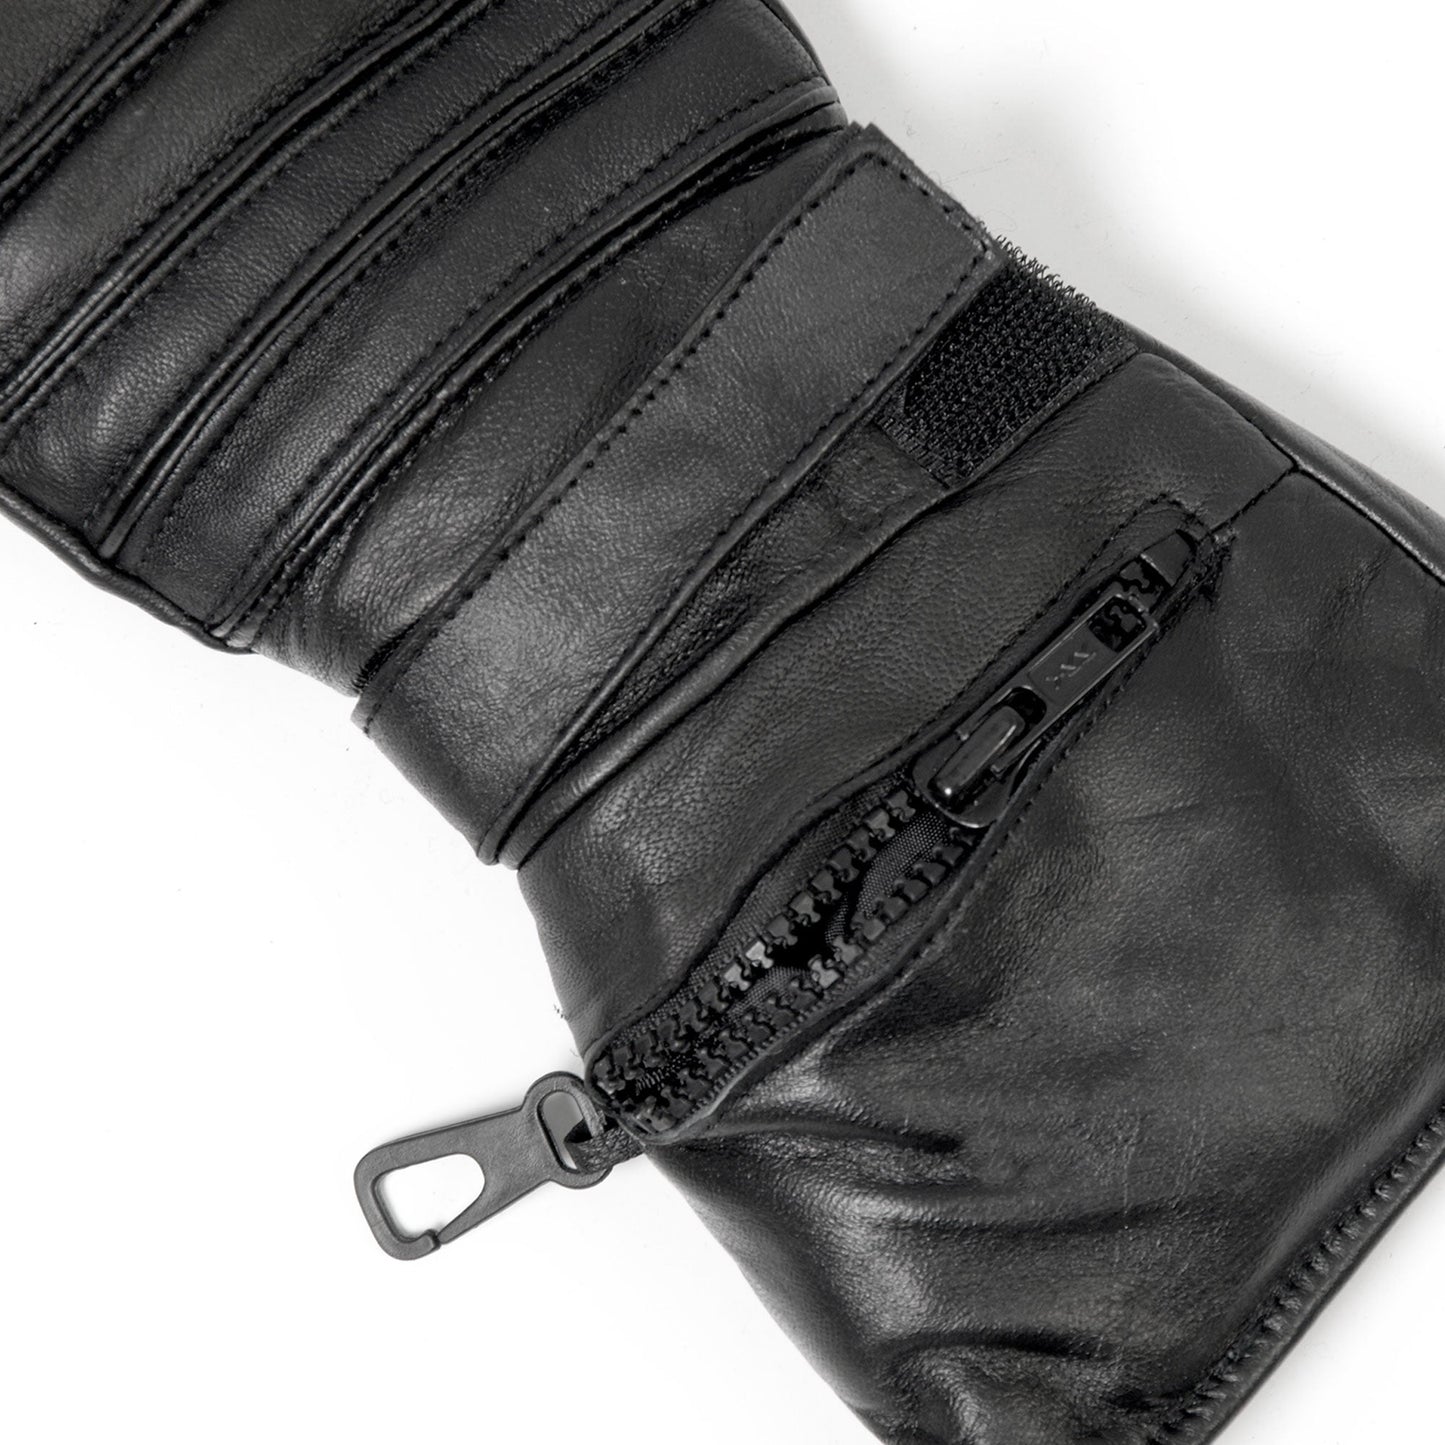 Men's Black Leather Gauntlet Glove with Quilted Lining